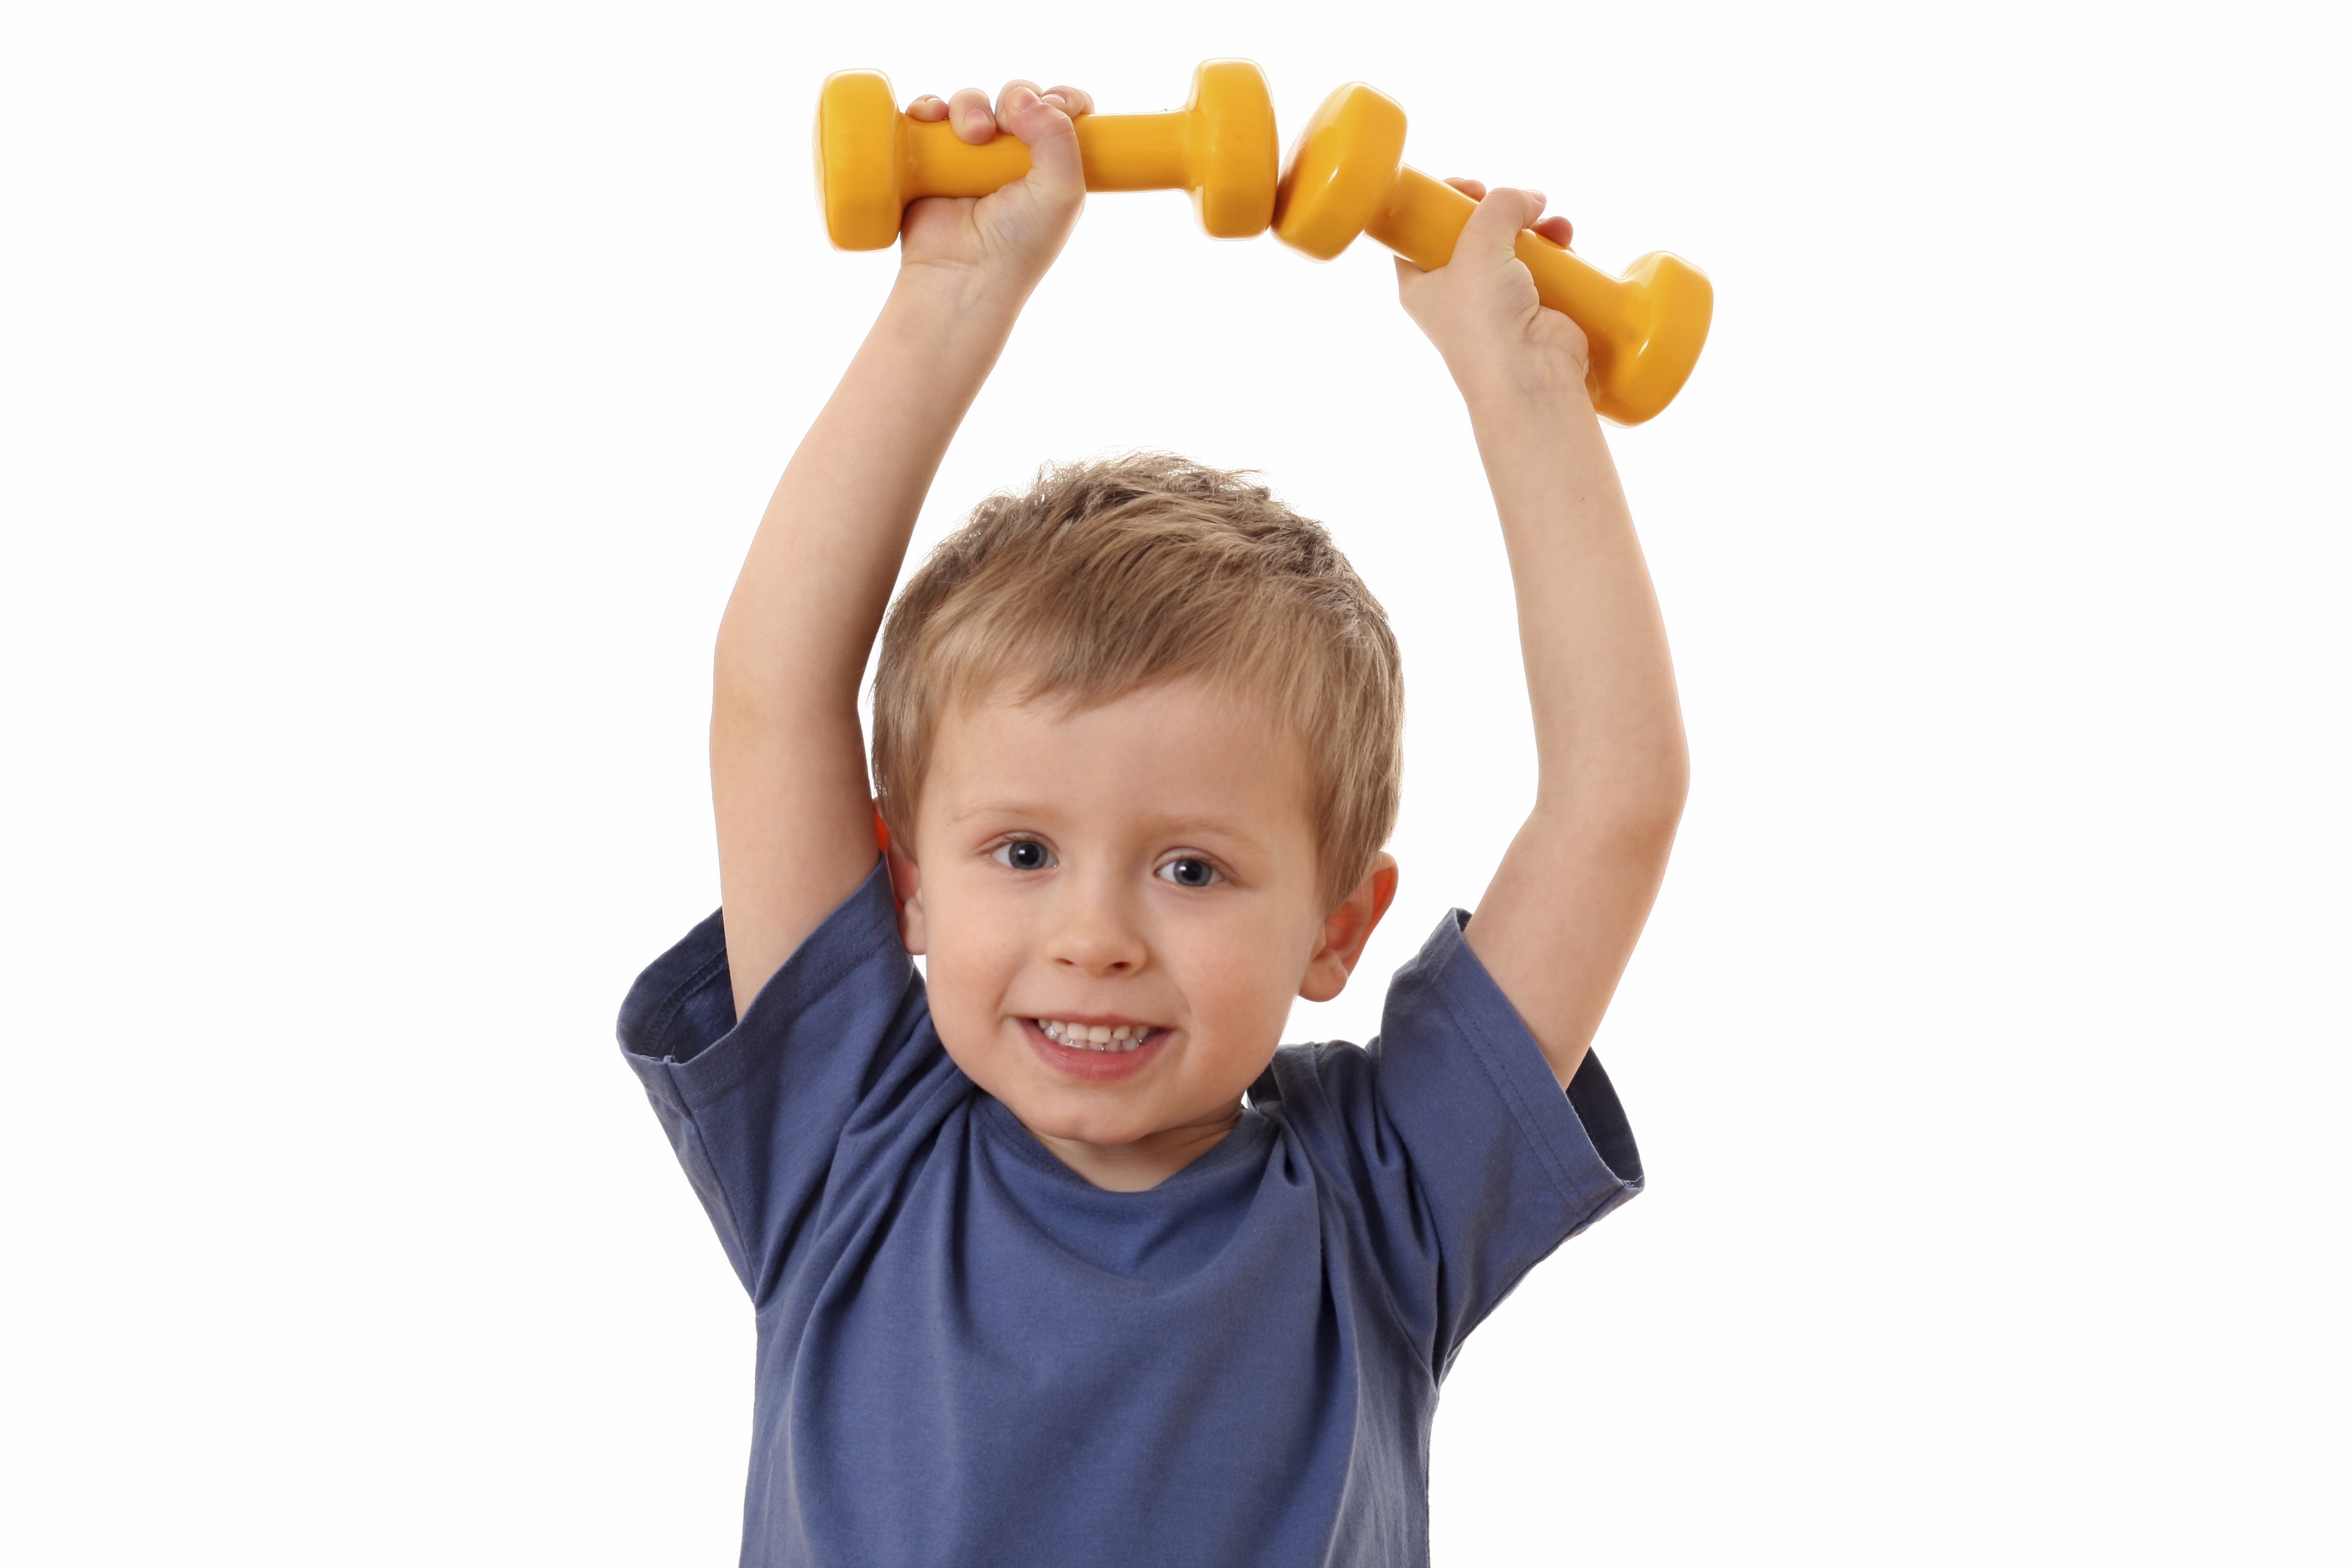 What Age Is Safe to Lift Weights? - Children's Health